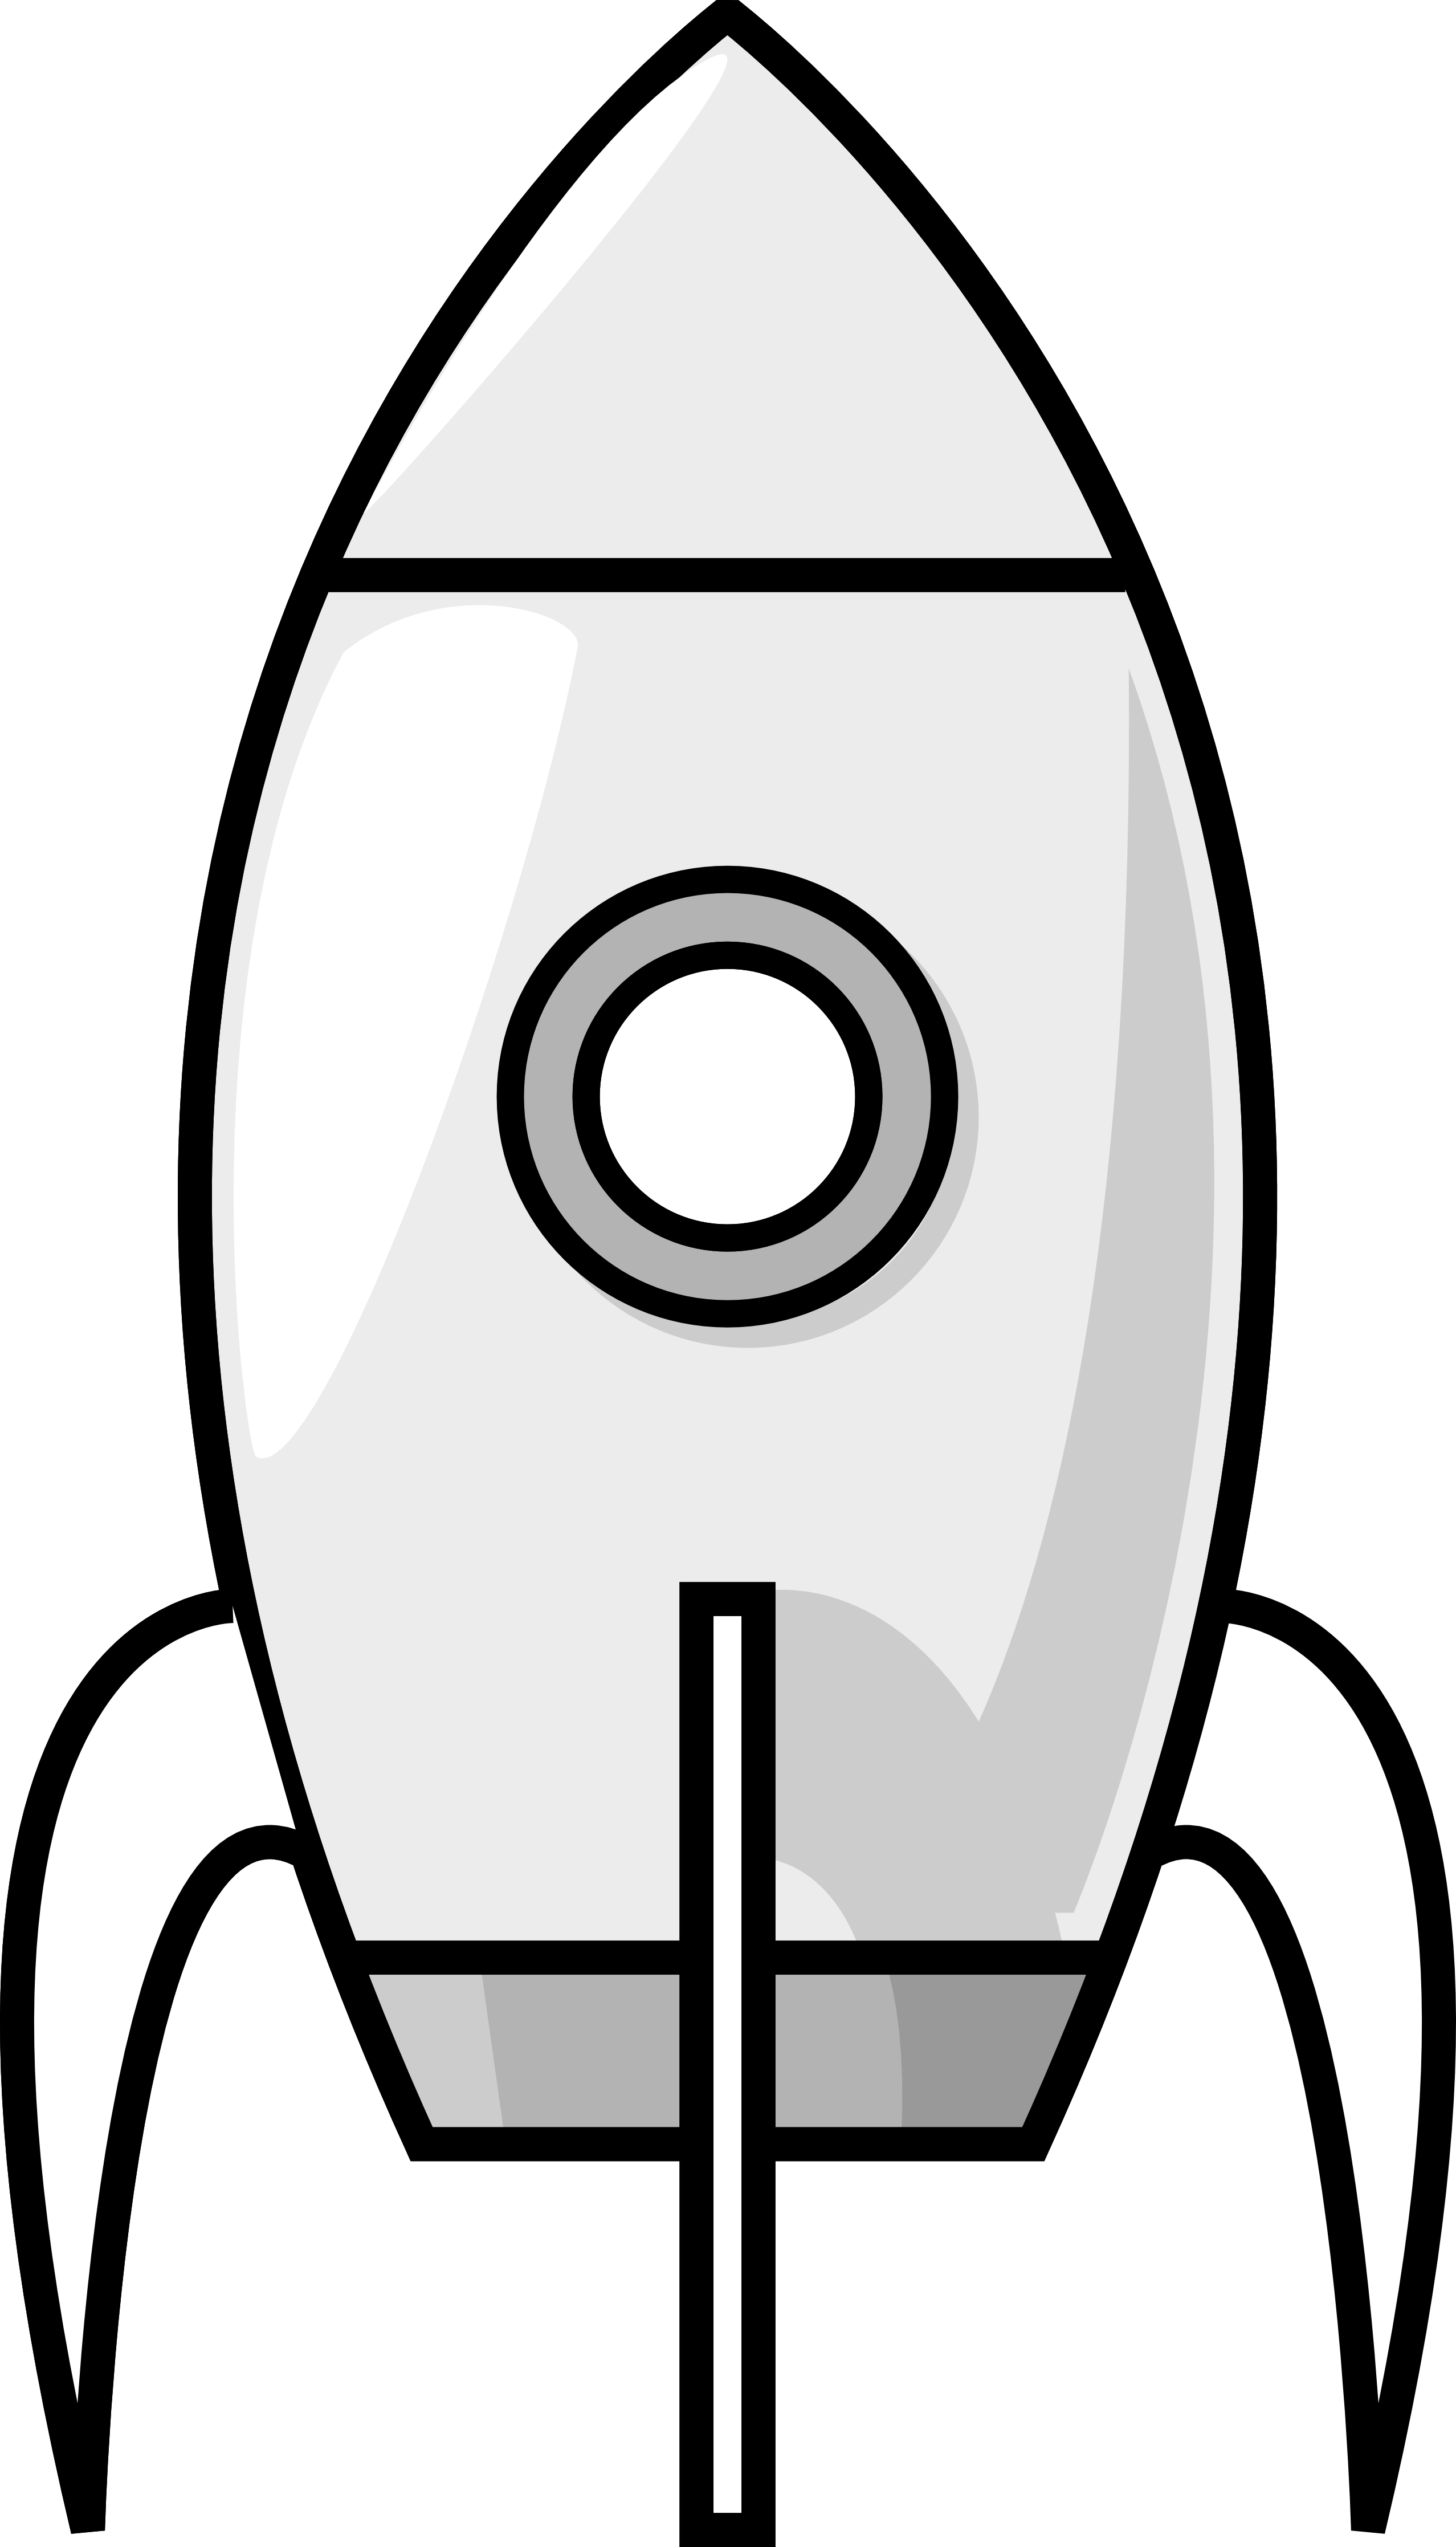 Rocket black and white clipart clipart kid